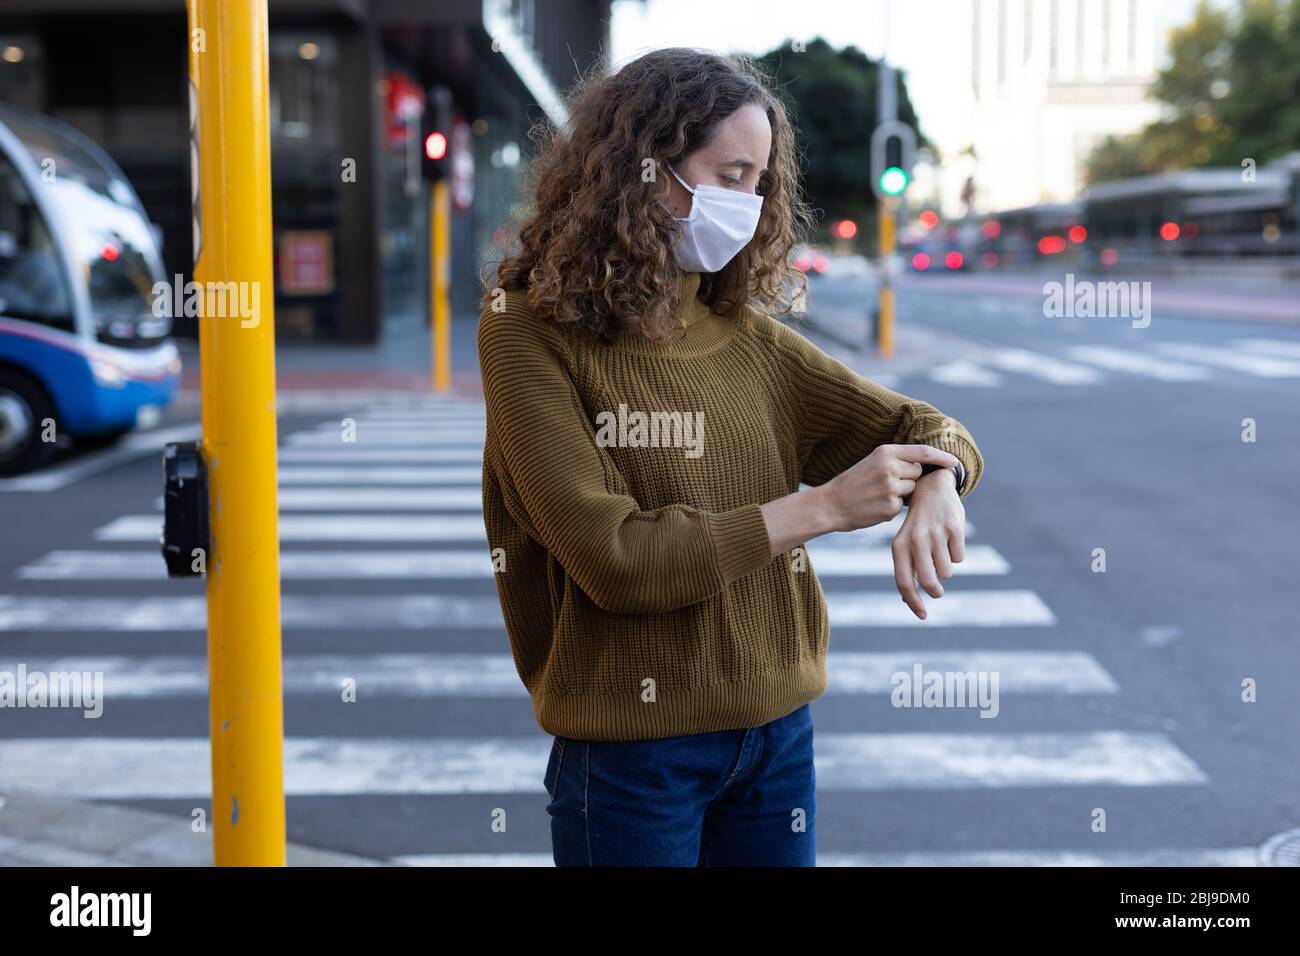 Caucasian woman wearing a protective mask in the streets Stock Photo